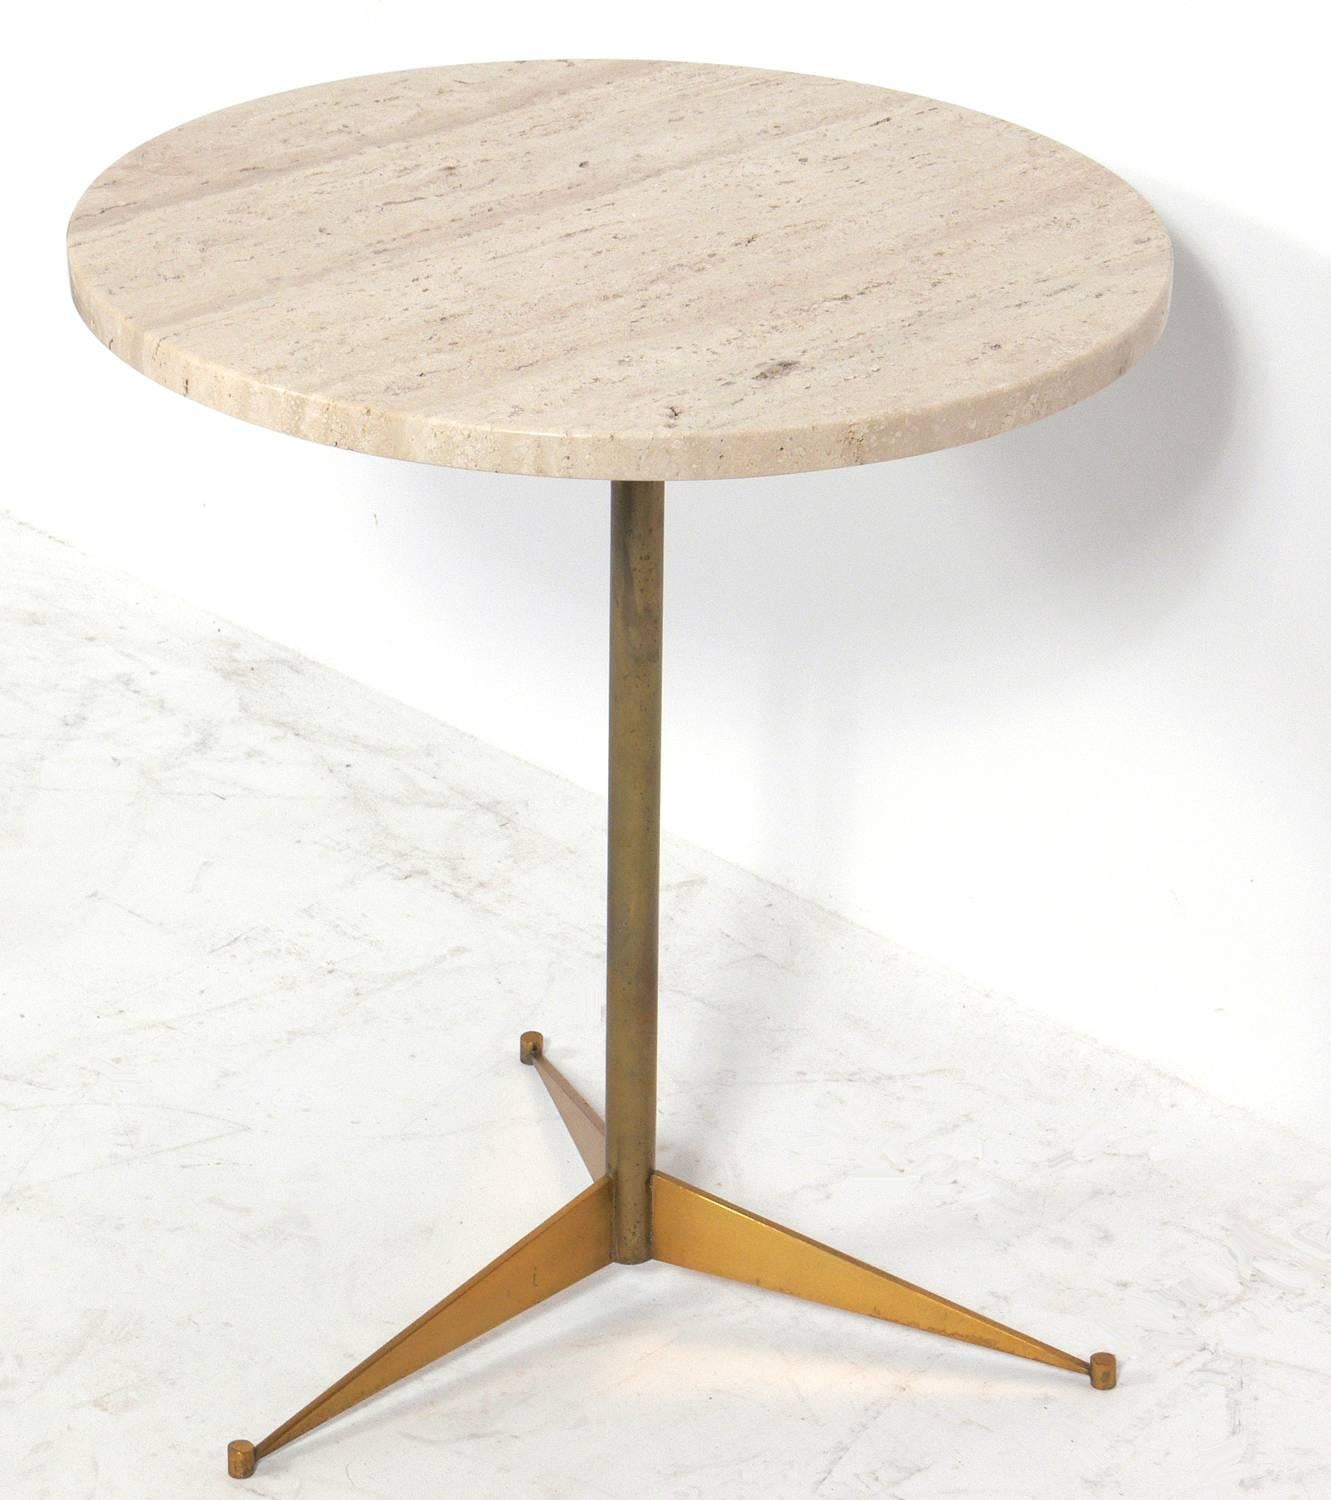 Paul McCobb brass and travertine tripod table, American, circa 1950s. Perfect between a pair of chairs.